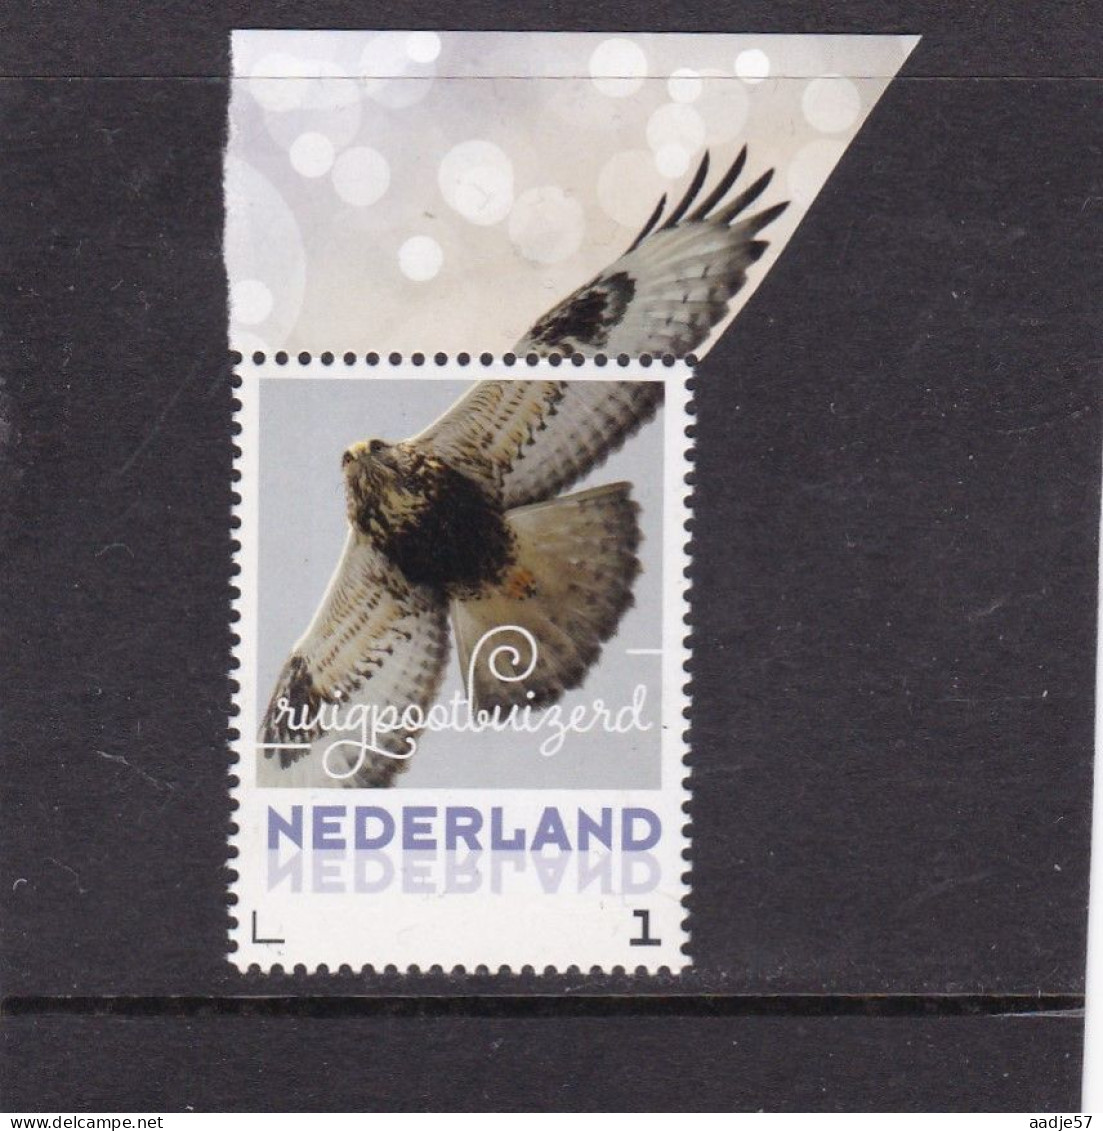 Netherlands Pays Bas 2016 Ruigpoot Buizerd Rough-legged Buzzard MNH** - Unused Stamps